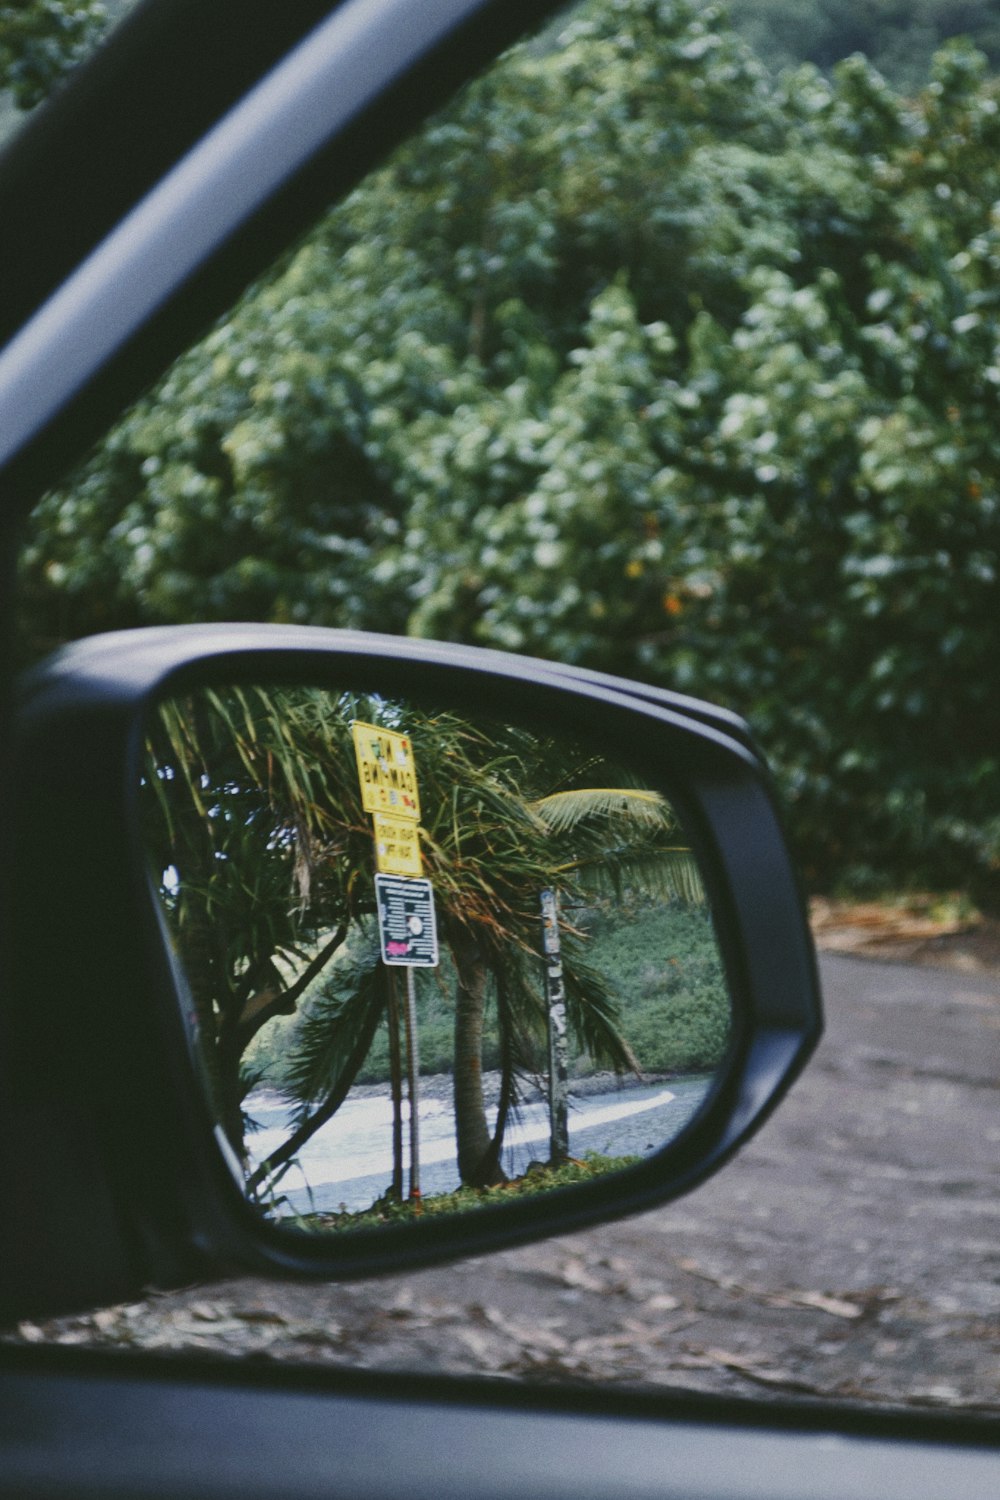 a side view mirror with a street sign in the reflection